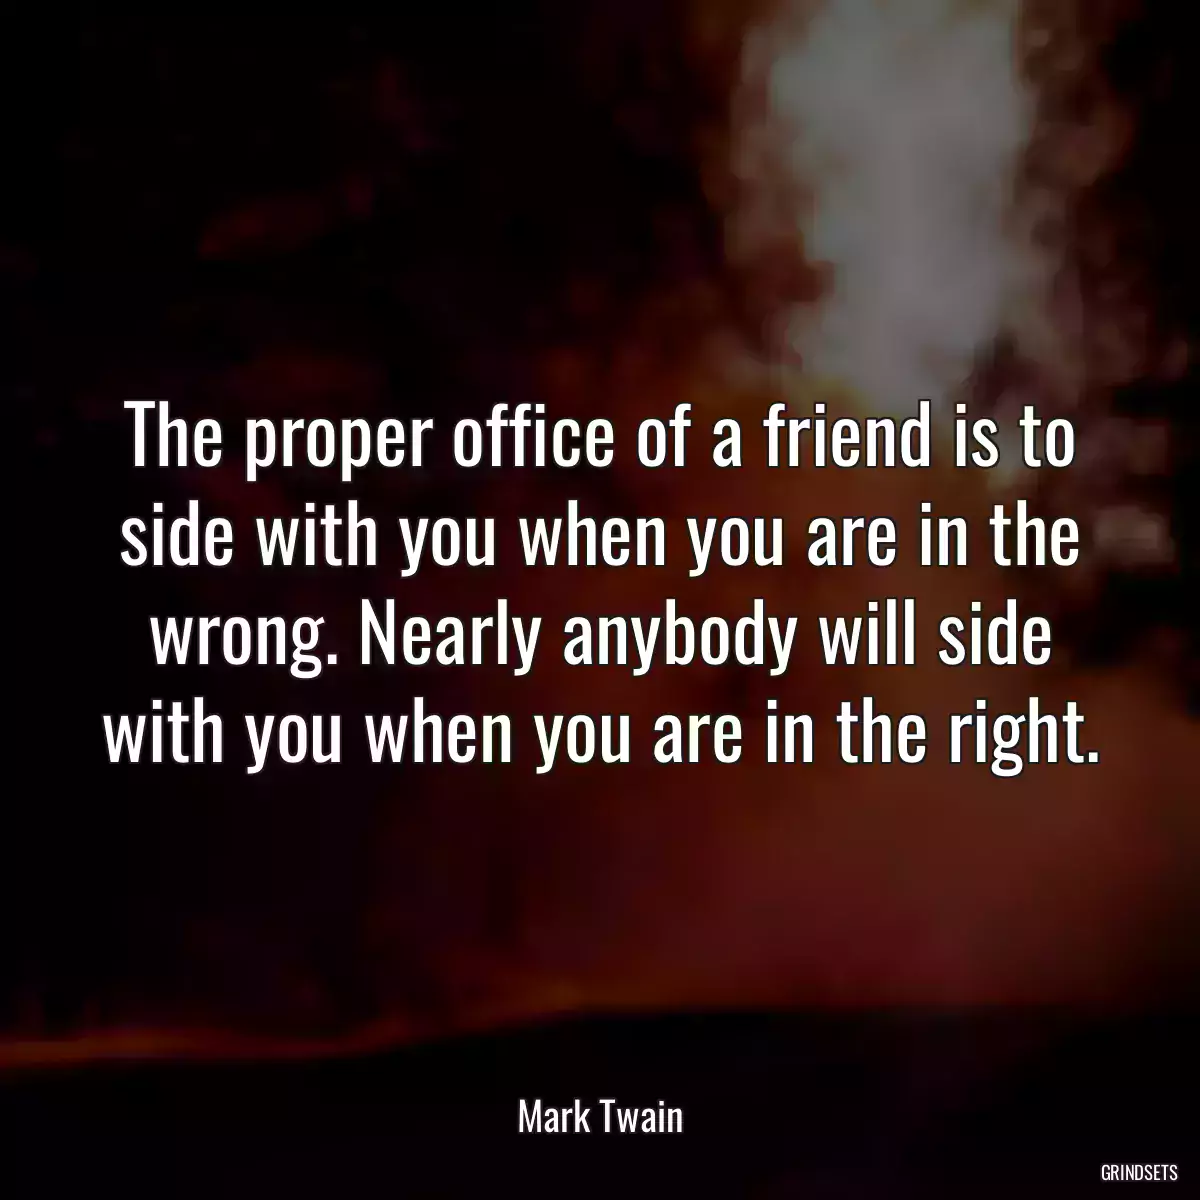 The proper office of a friend is to side with you when you are in the wrong. Nearly anybody will side with you when you are in the right.